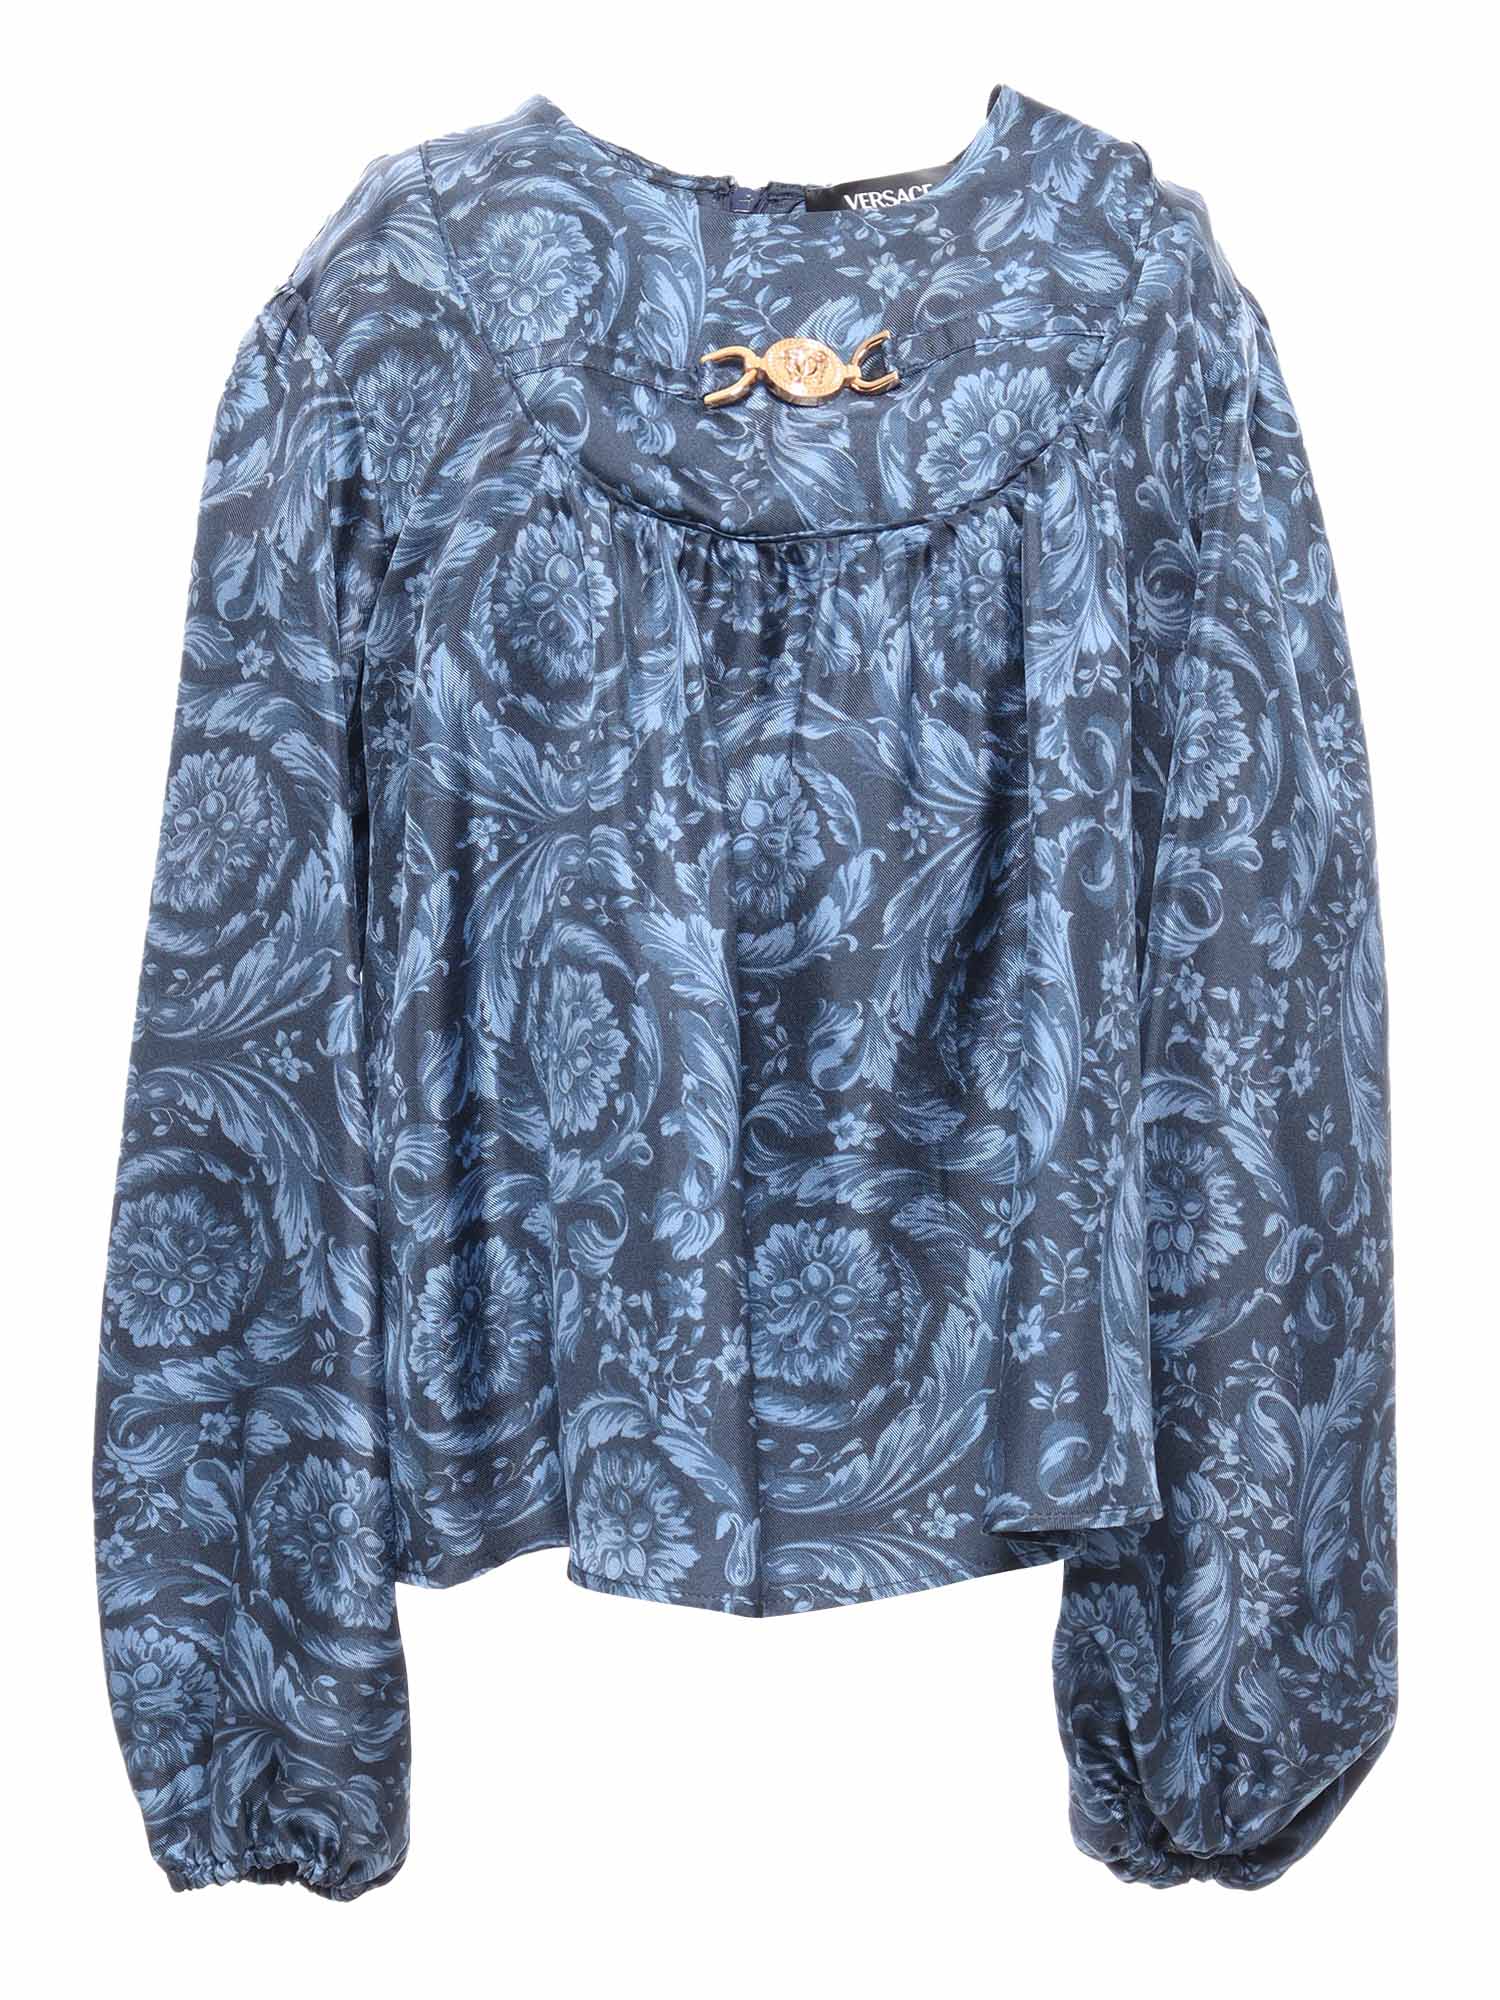 Versace Kids' Baroque Style Shirt In Blue